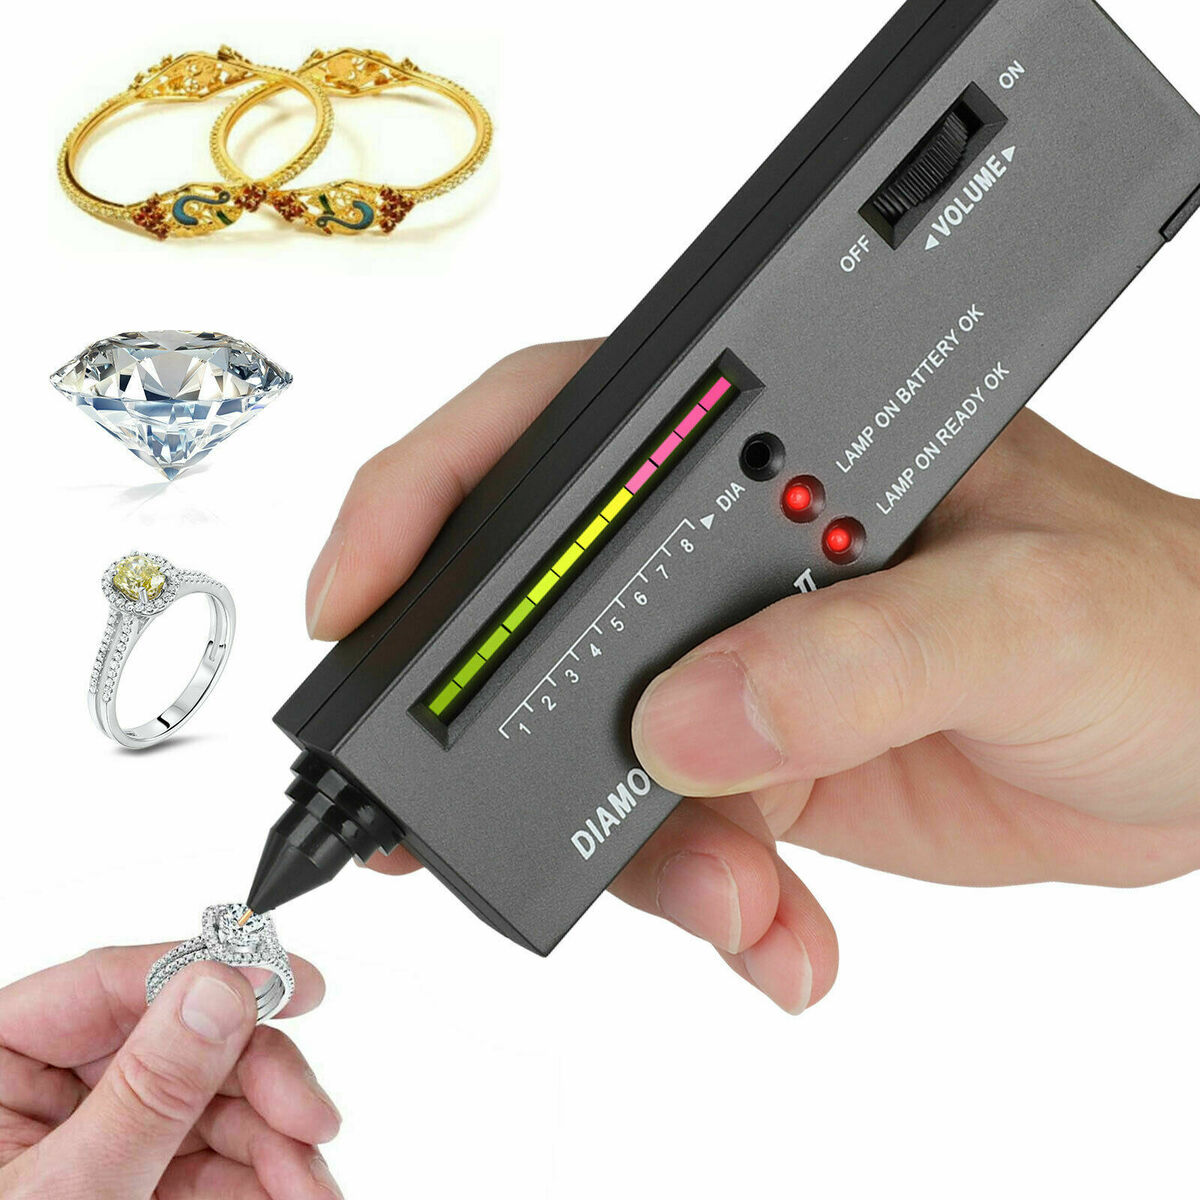 Diamond Tester, Practical Portable Jewelry Test Tool Diamond Selector III with LED Indicator for Novice and Expert